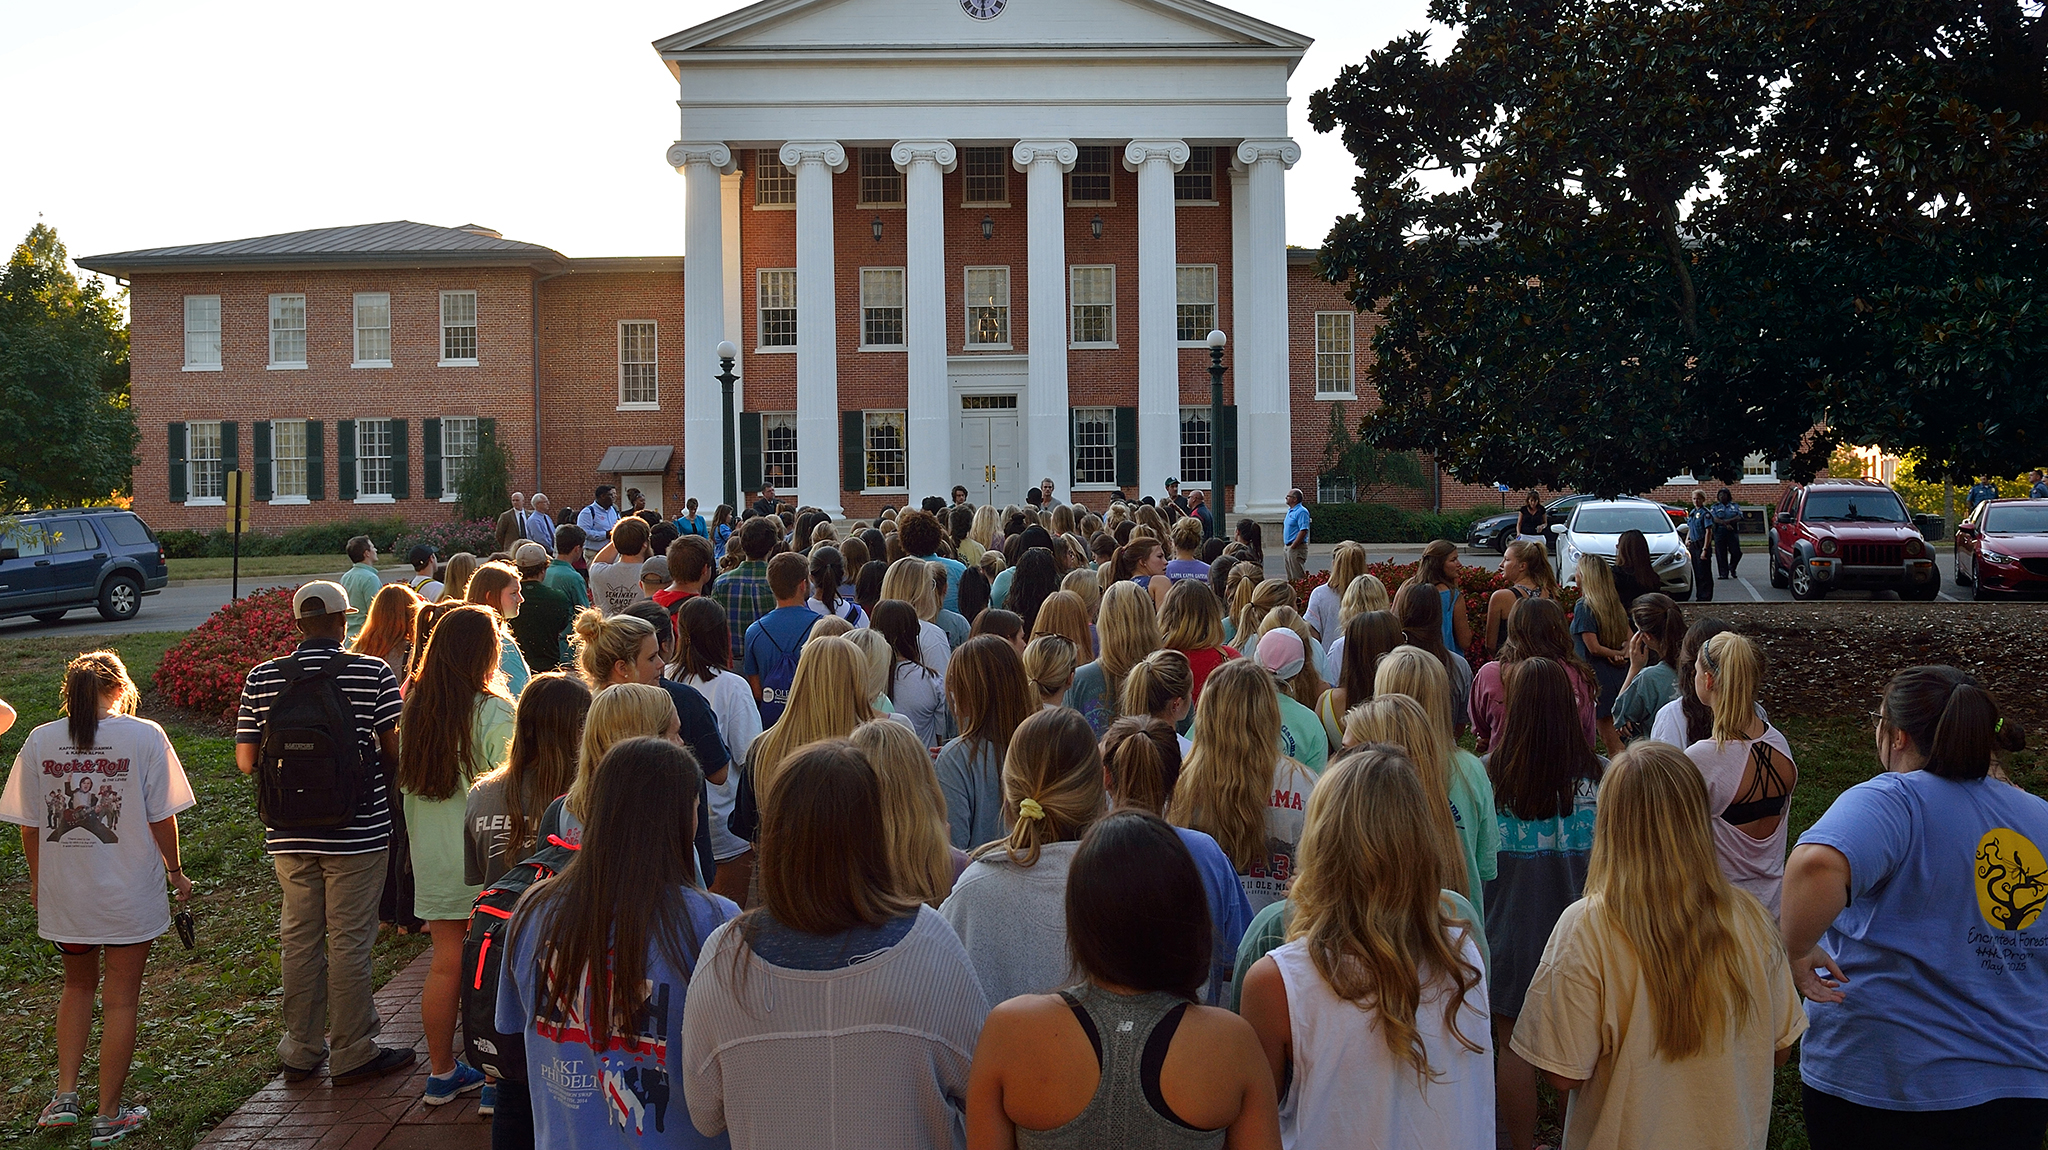 students gather for a candlelight vigil after one of the many active shooter situations in public places in the United States in the last 10 years. UM professor Ana Velitchkova will spend the next semester at the University of Notre Dame studying the sociological patterns of mass shooters, active shooters and extremist groups. Photo by Thomas Graning/Ole Miss Digital Imaging Services